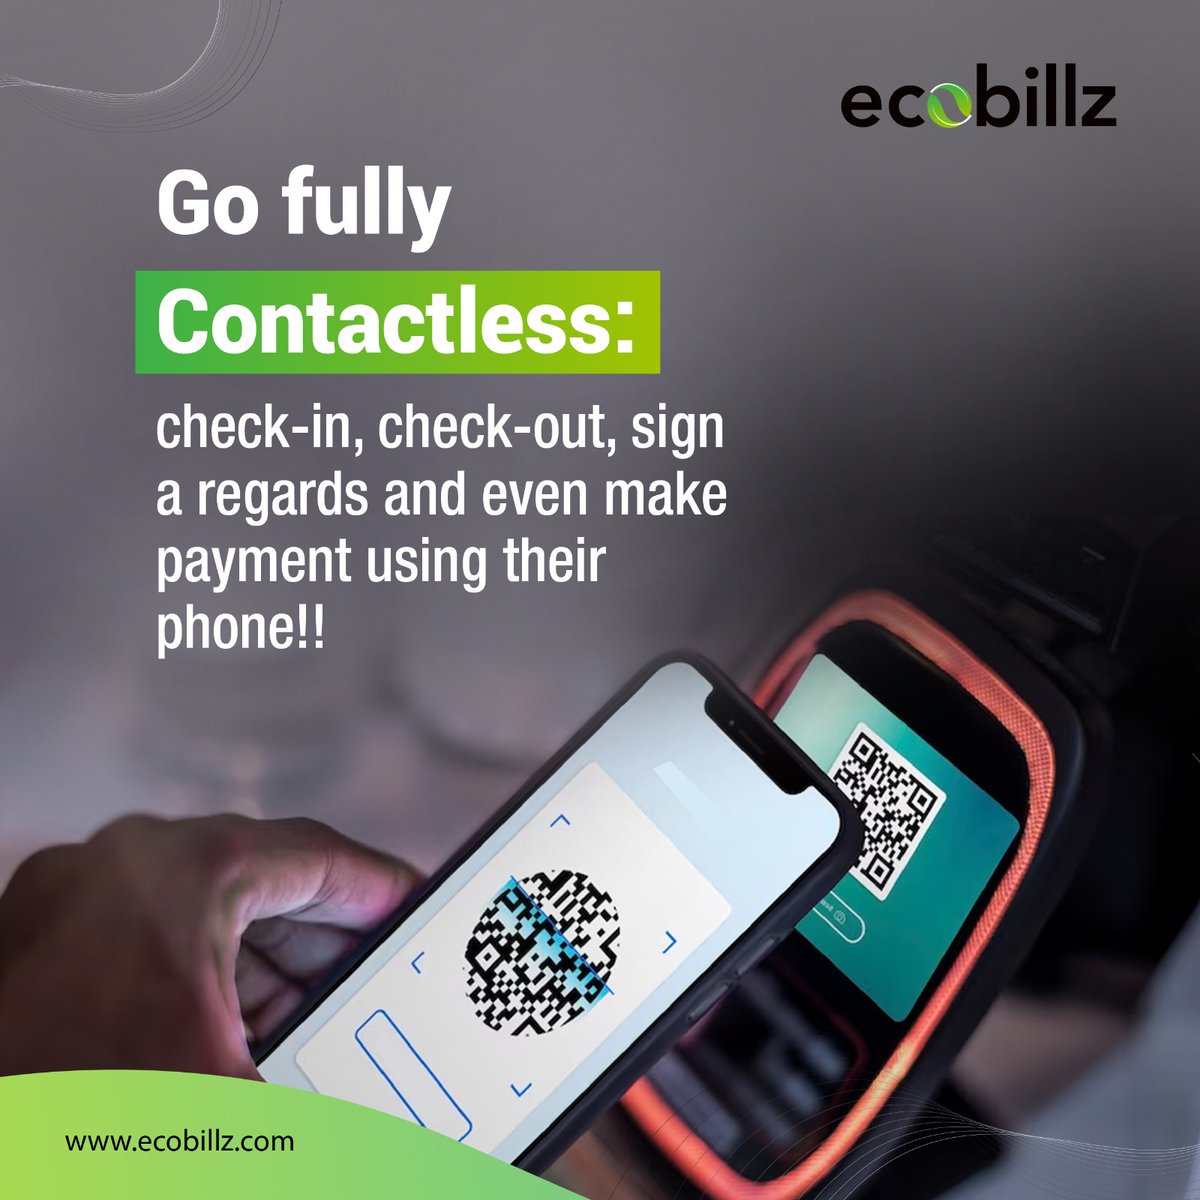 @ecobillz helps you go fully contactless: check-in ,check-out ,sign a regards and even make payment using their phone!! #paperless #contactless #checkin #checkout #contactlesspayments #ai #automation #automationsolution #artificialintelligence #hospitality #hospitalitytech